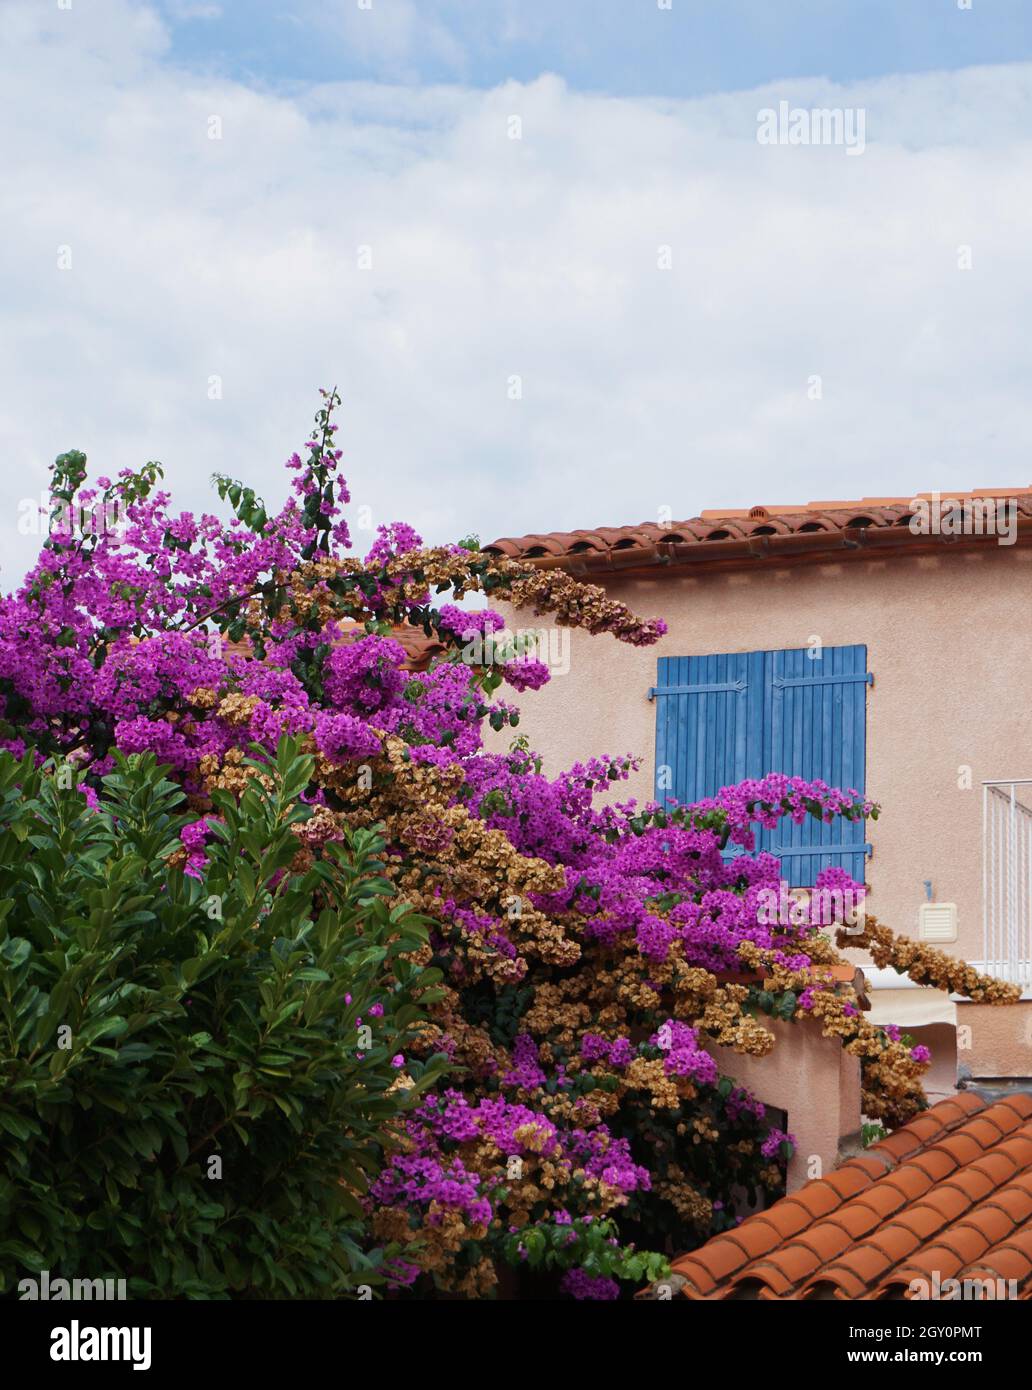 Exterior of house in southern France featuring terracotta roof tiles, blue wooden window shutters and plant with purple flowers in bloom Stock Photo